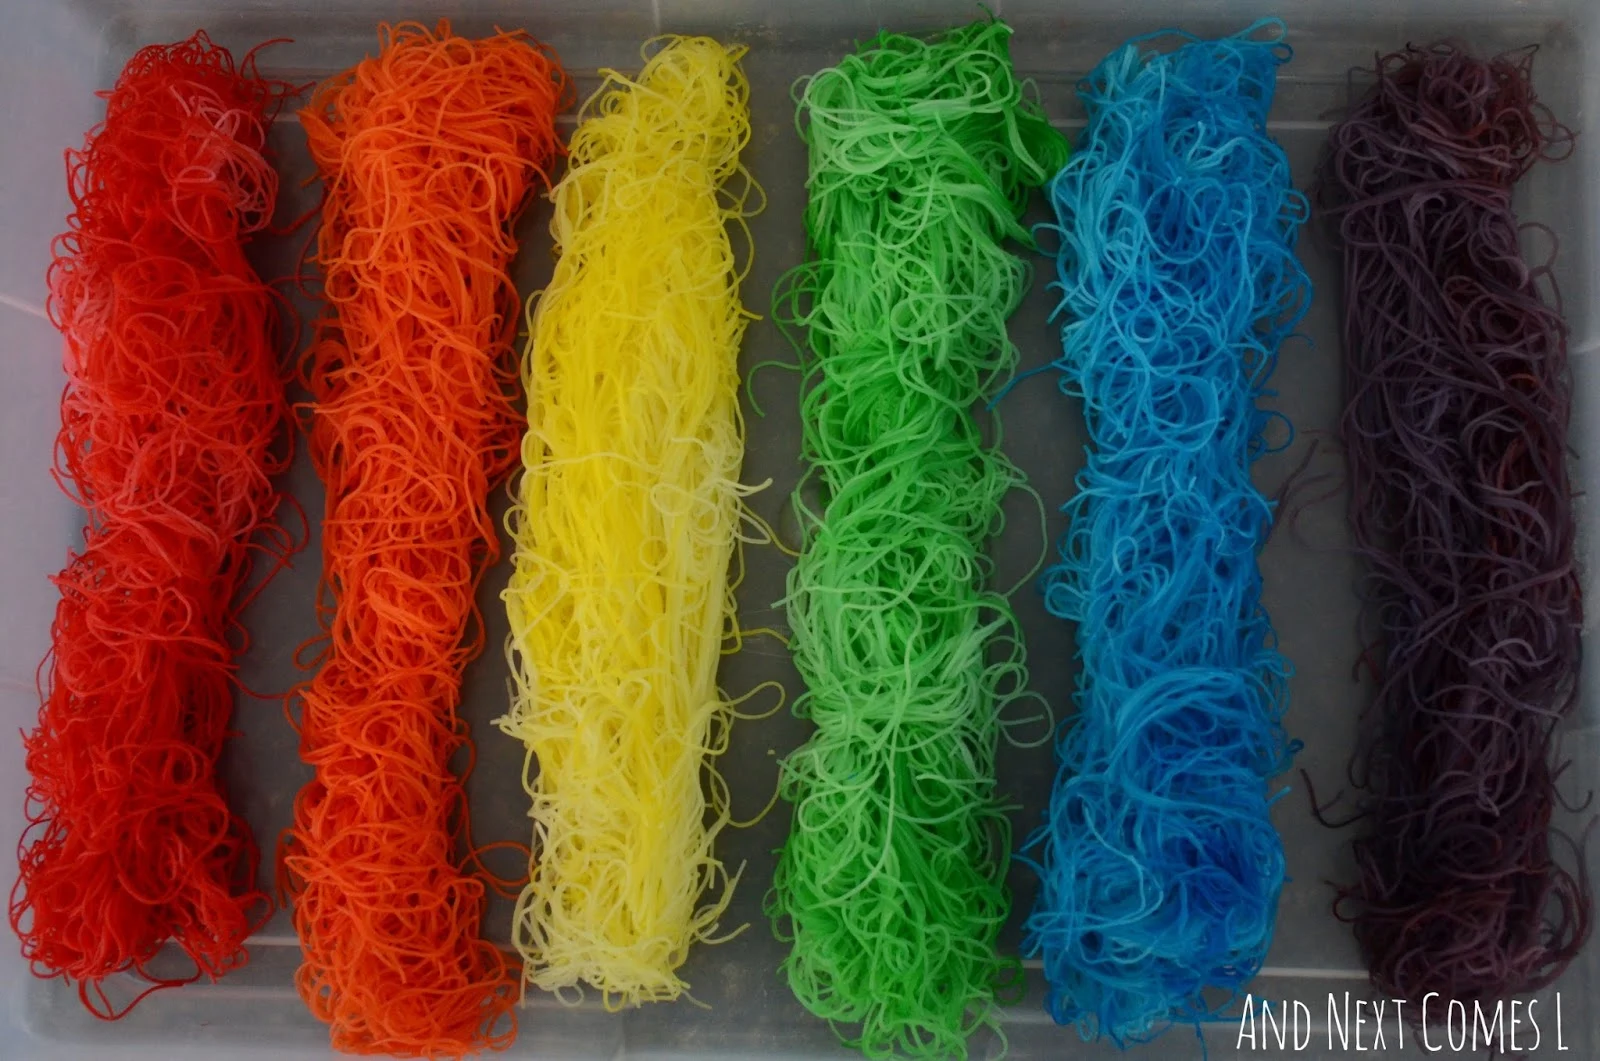 Rainbow rice noodles sensory bin for kids from And Next Comes L